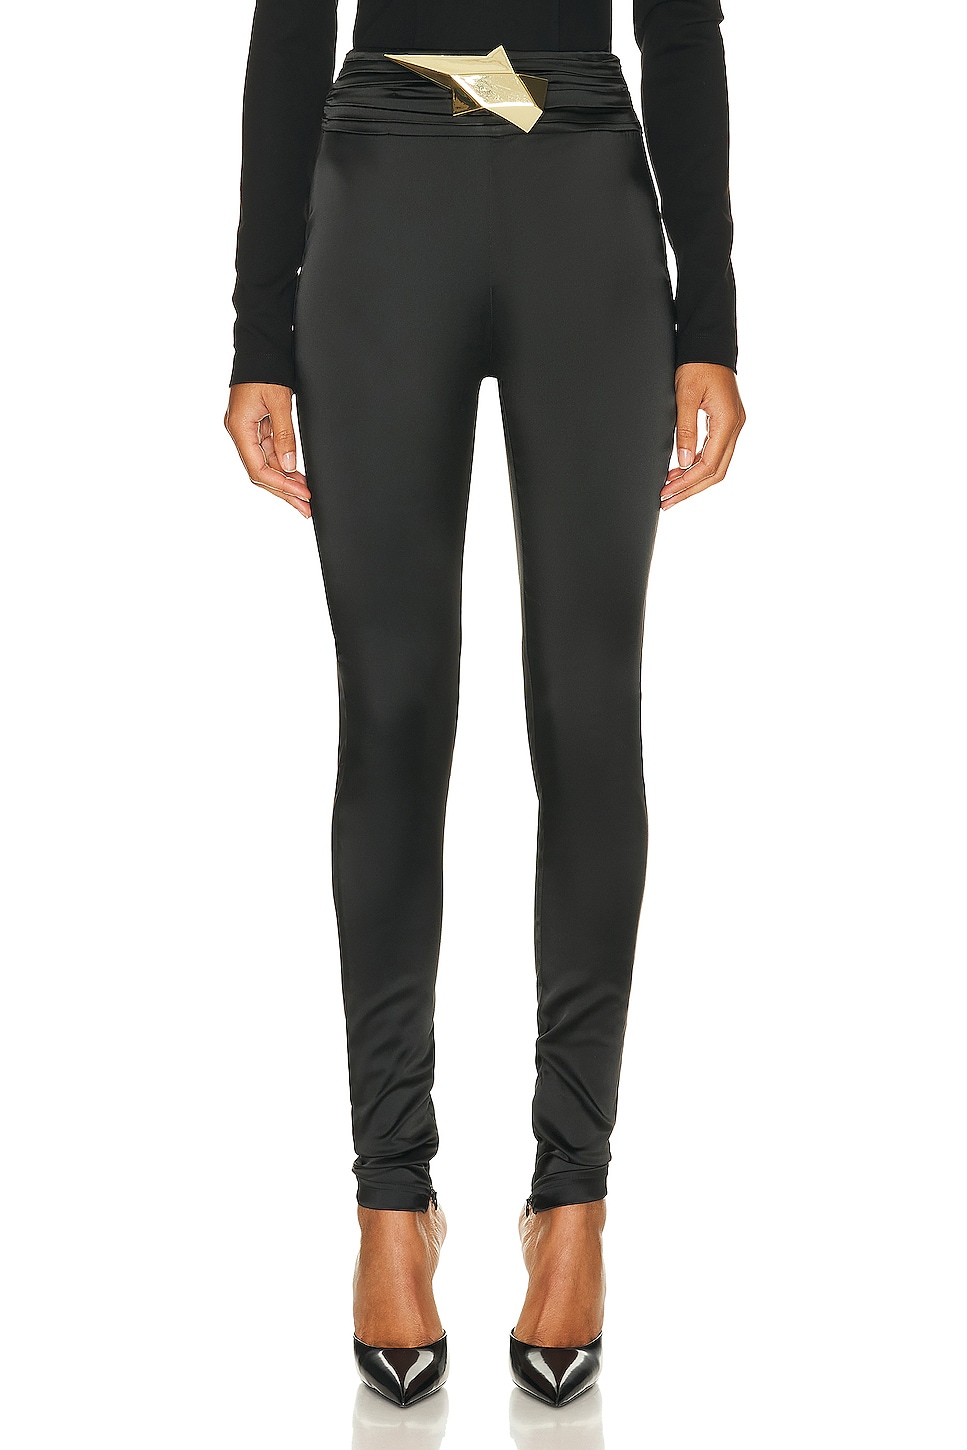 Image 1 of AREA High Waisted Star Legging in Black